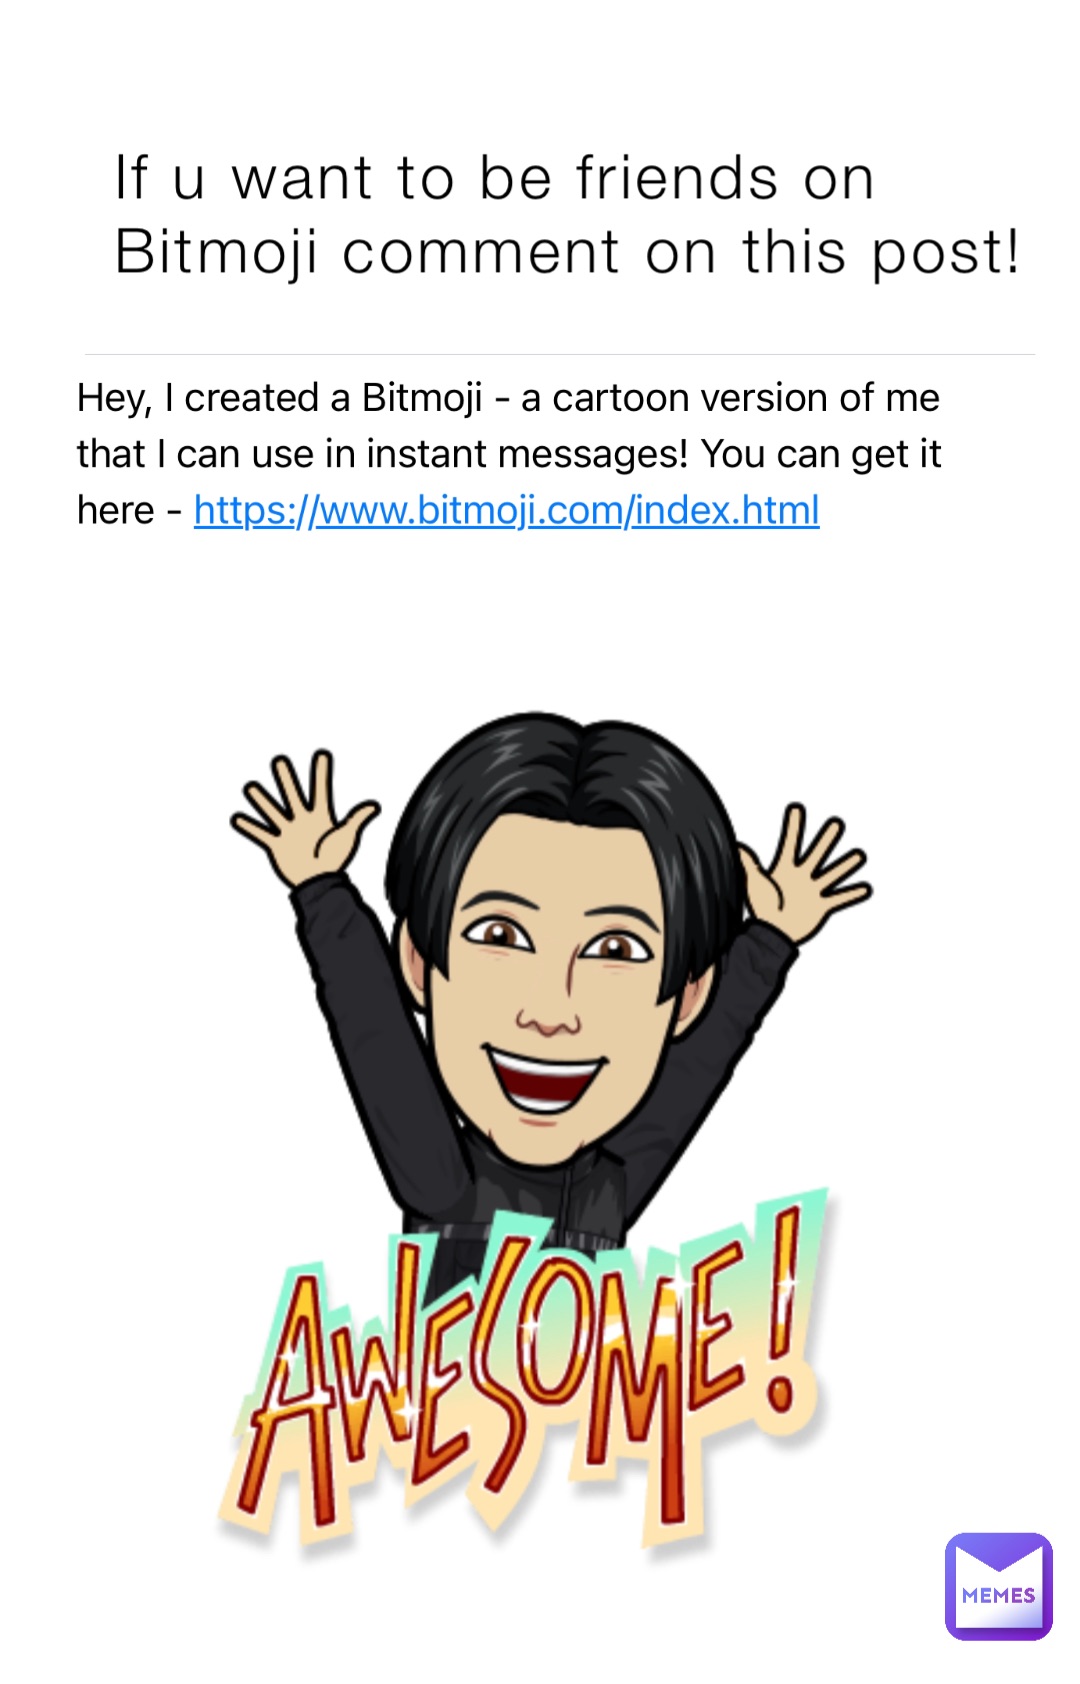 If u want to be friends on Bitmoji comment on this post!